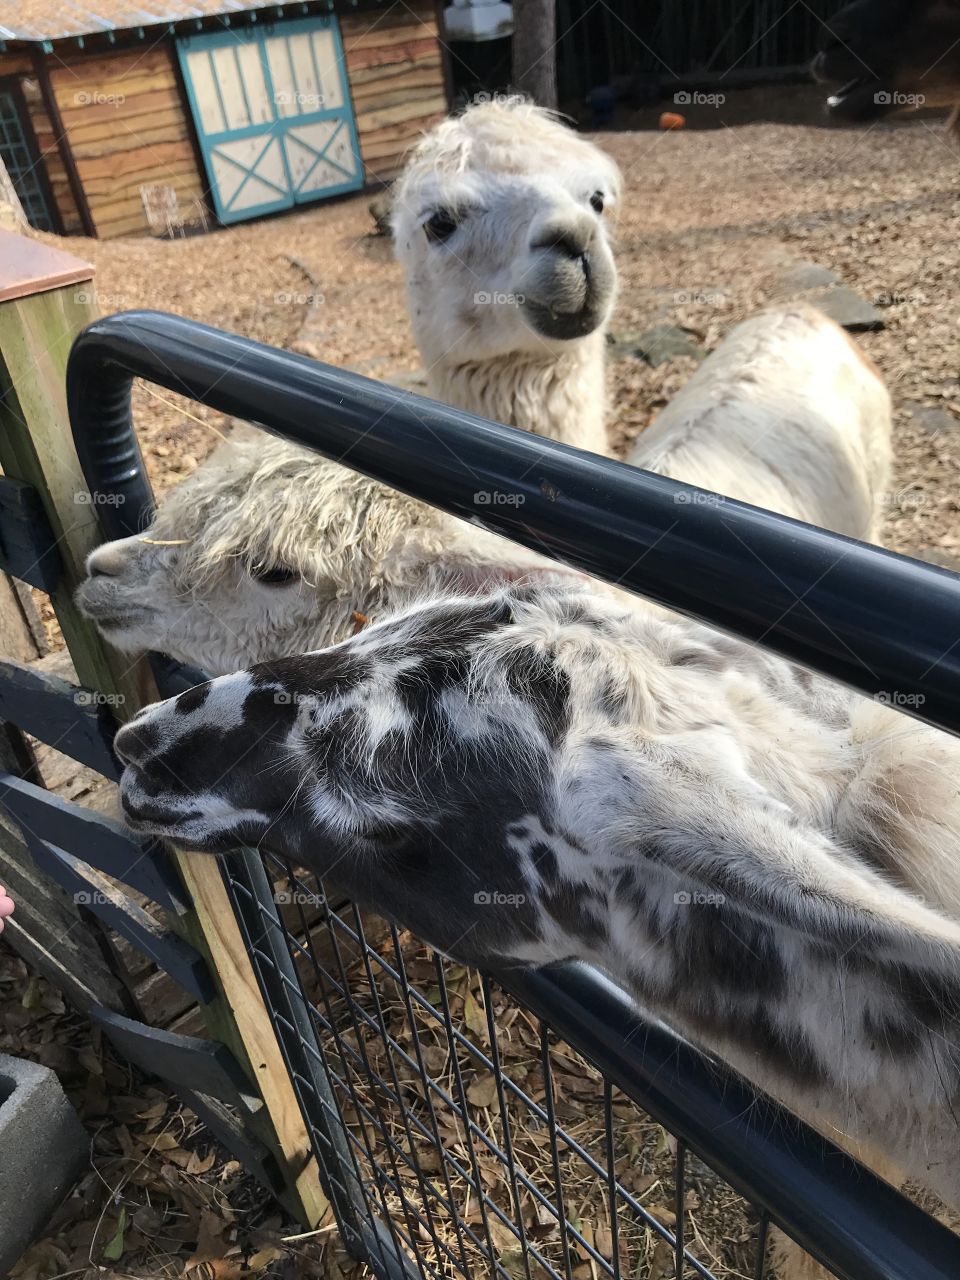 Three young llamas stick their heads through a fence for carrots